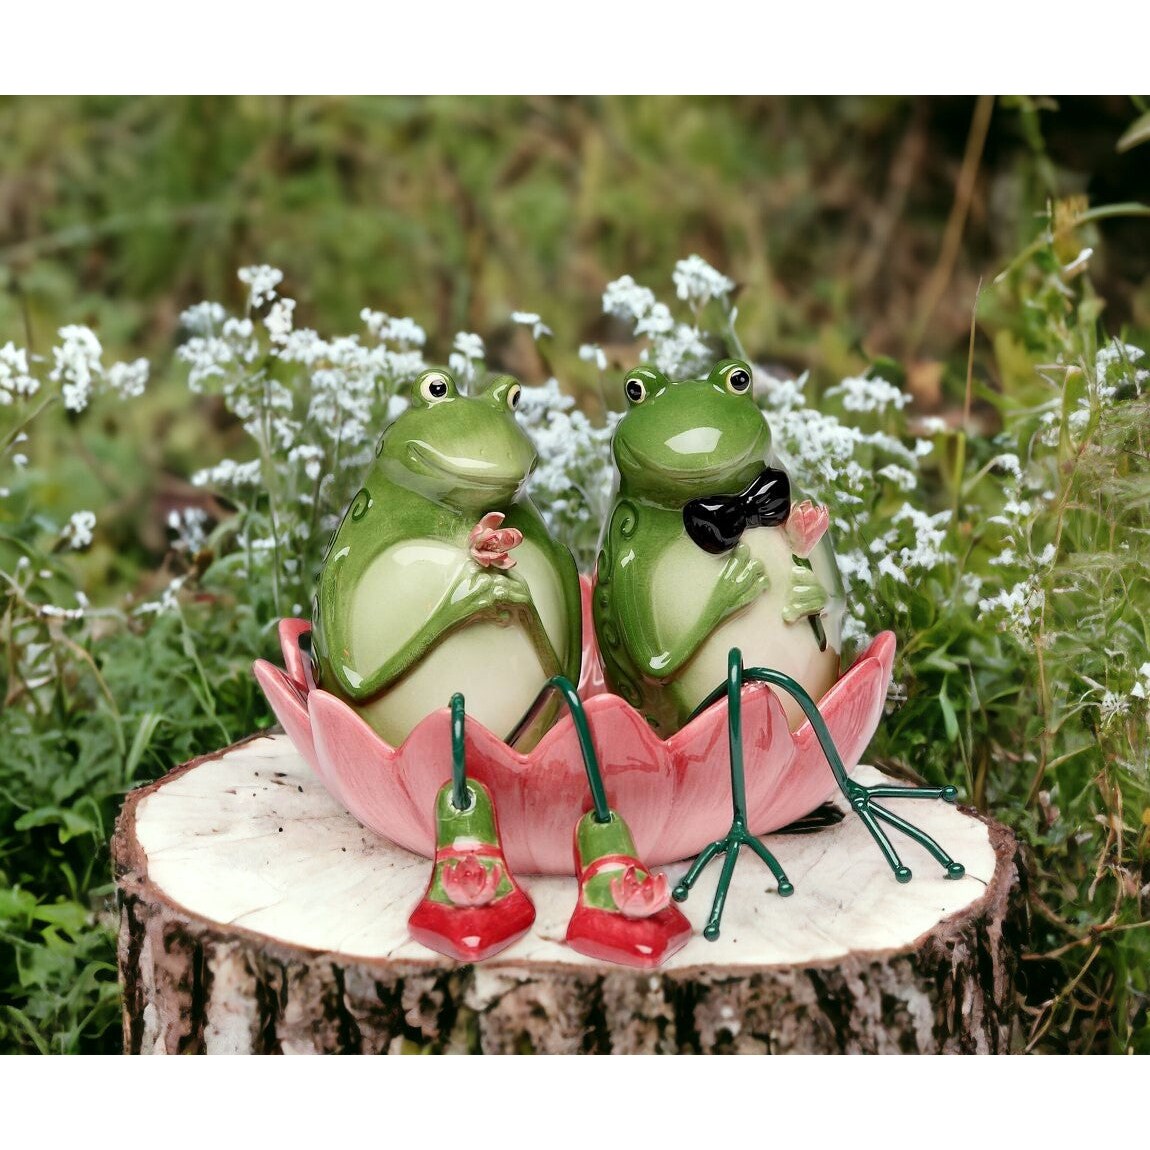 kevinsgiftshoppe Ceramic Frogs Sitting In Water Lily Salt and Pepper Shakers Wedding Decor or Gift Anniversary Decor or Gift